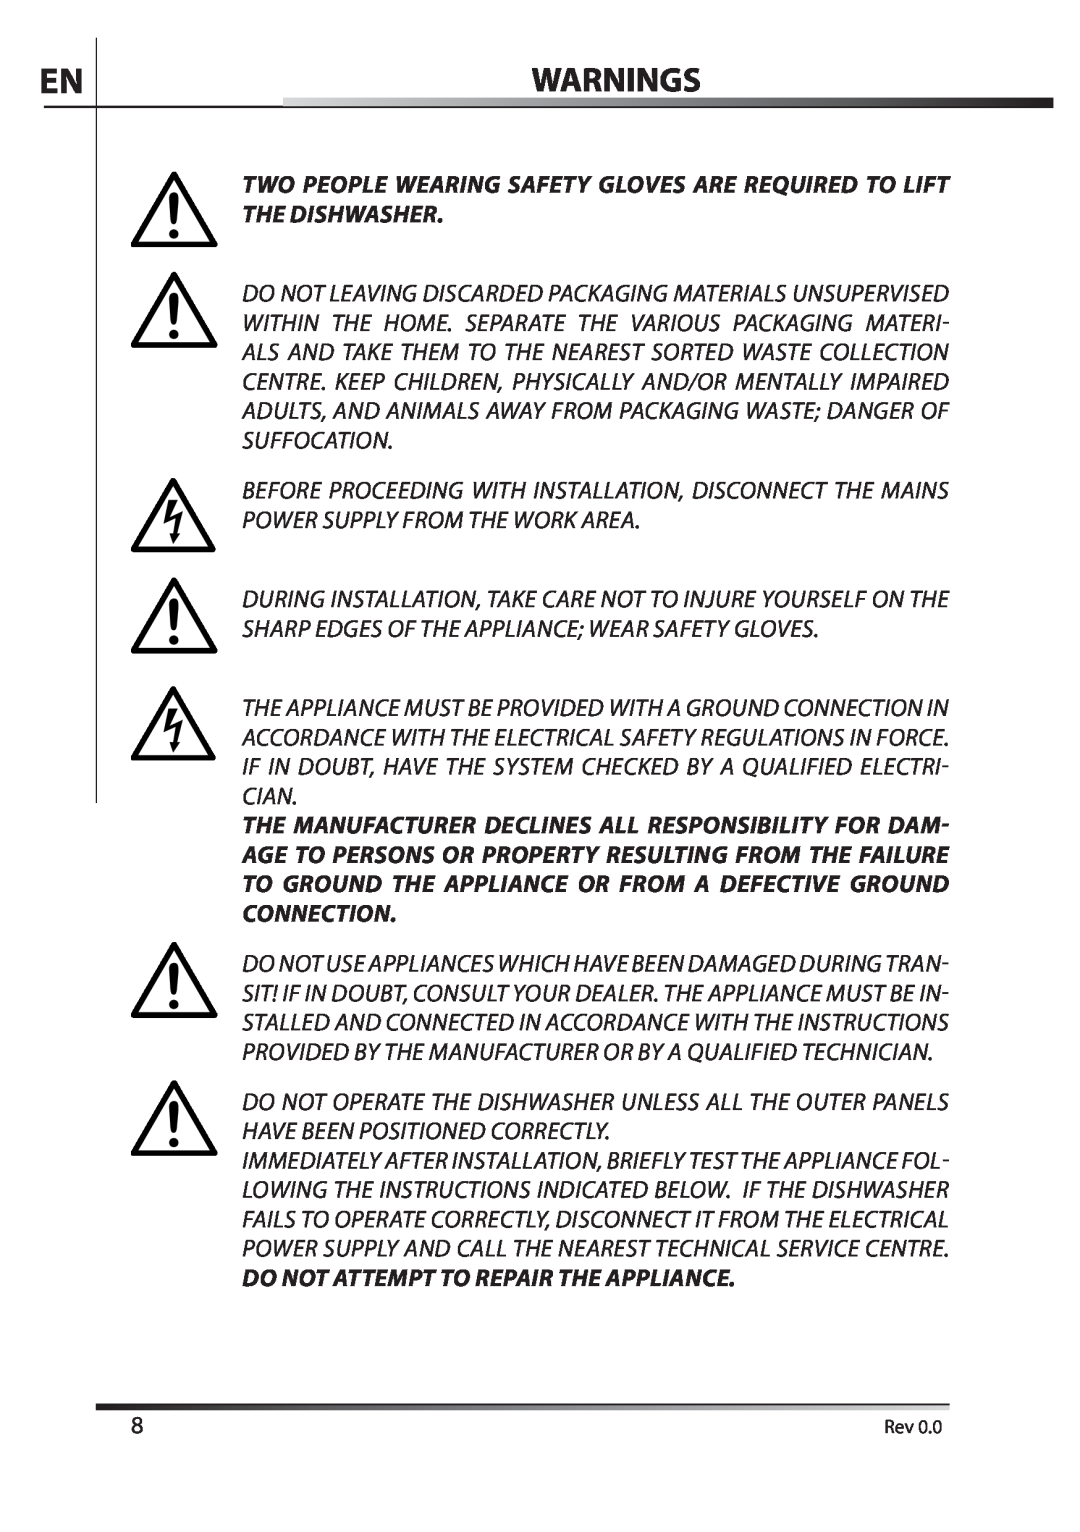 AEG F89078VI-M user manual Warnings, Two People Wearing Safety Gloves Are Required To Lift The Dishwasher 